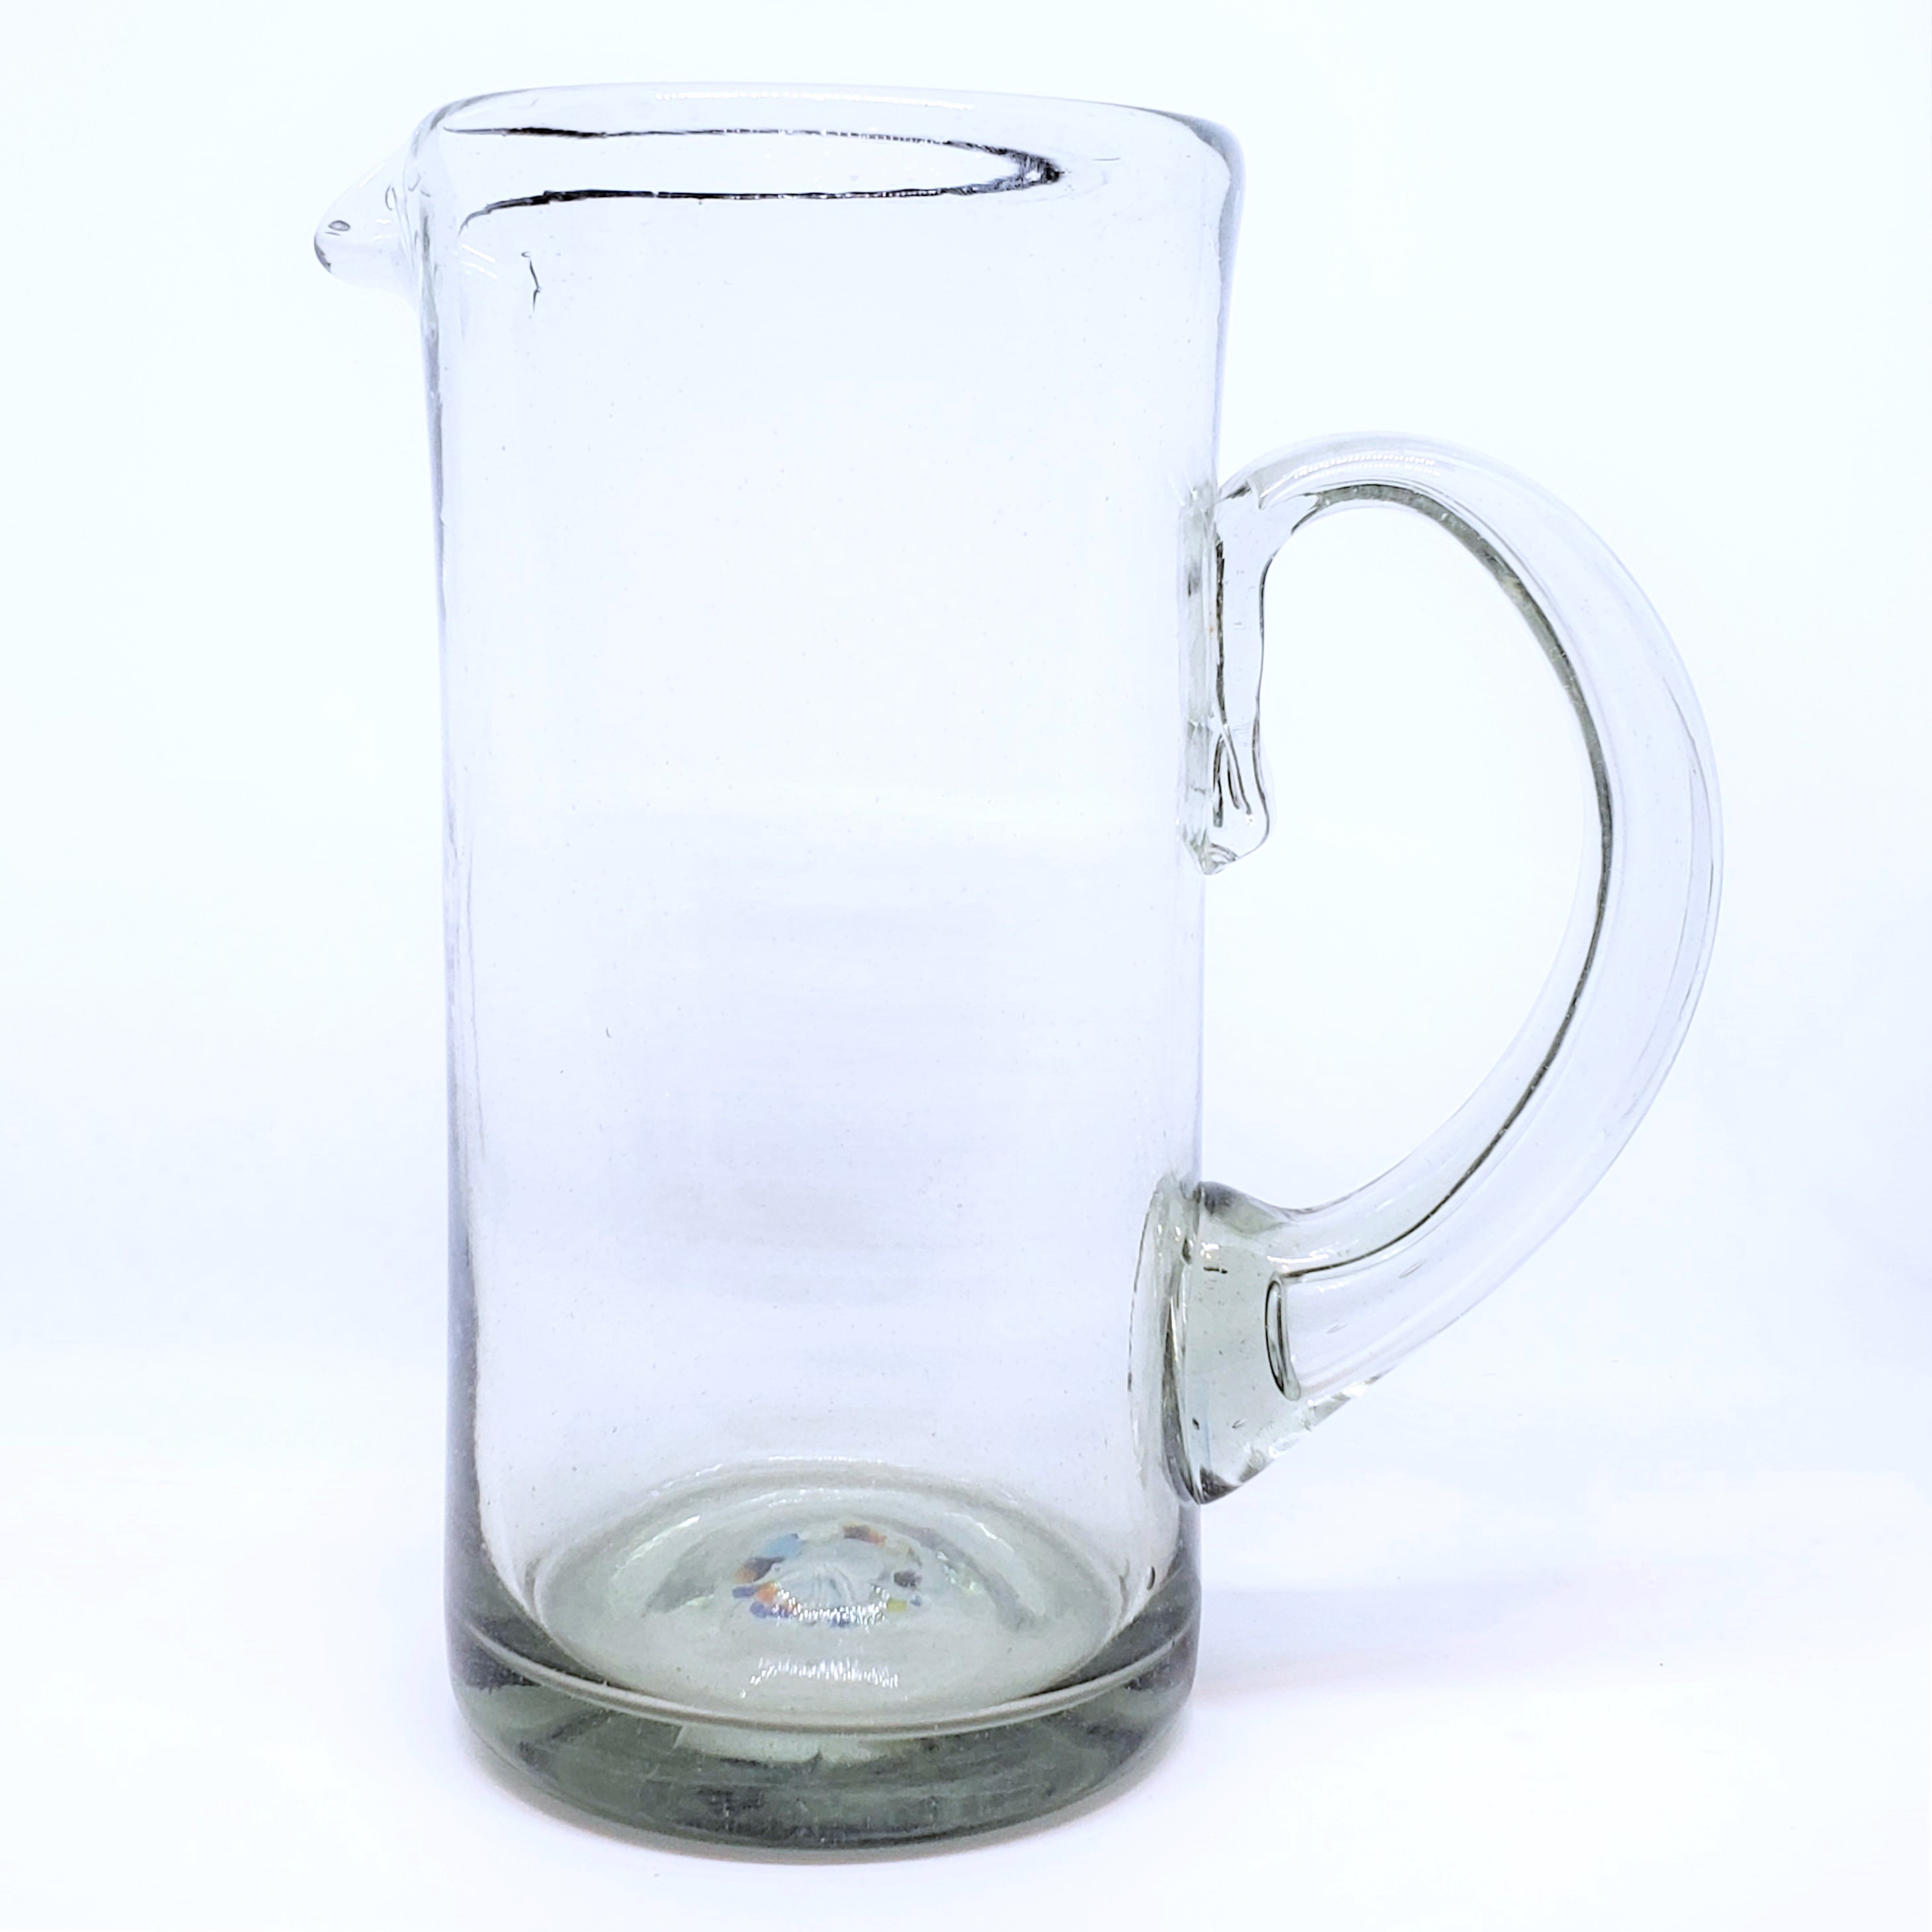 Wholesale MEXICAN GLASSWARE / Clear 60 oz Tall Pitcher / Match your clear tumblers and glasses with this gorgeous rustic clear tall pitcher.